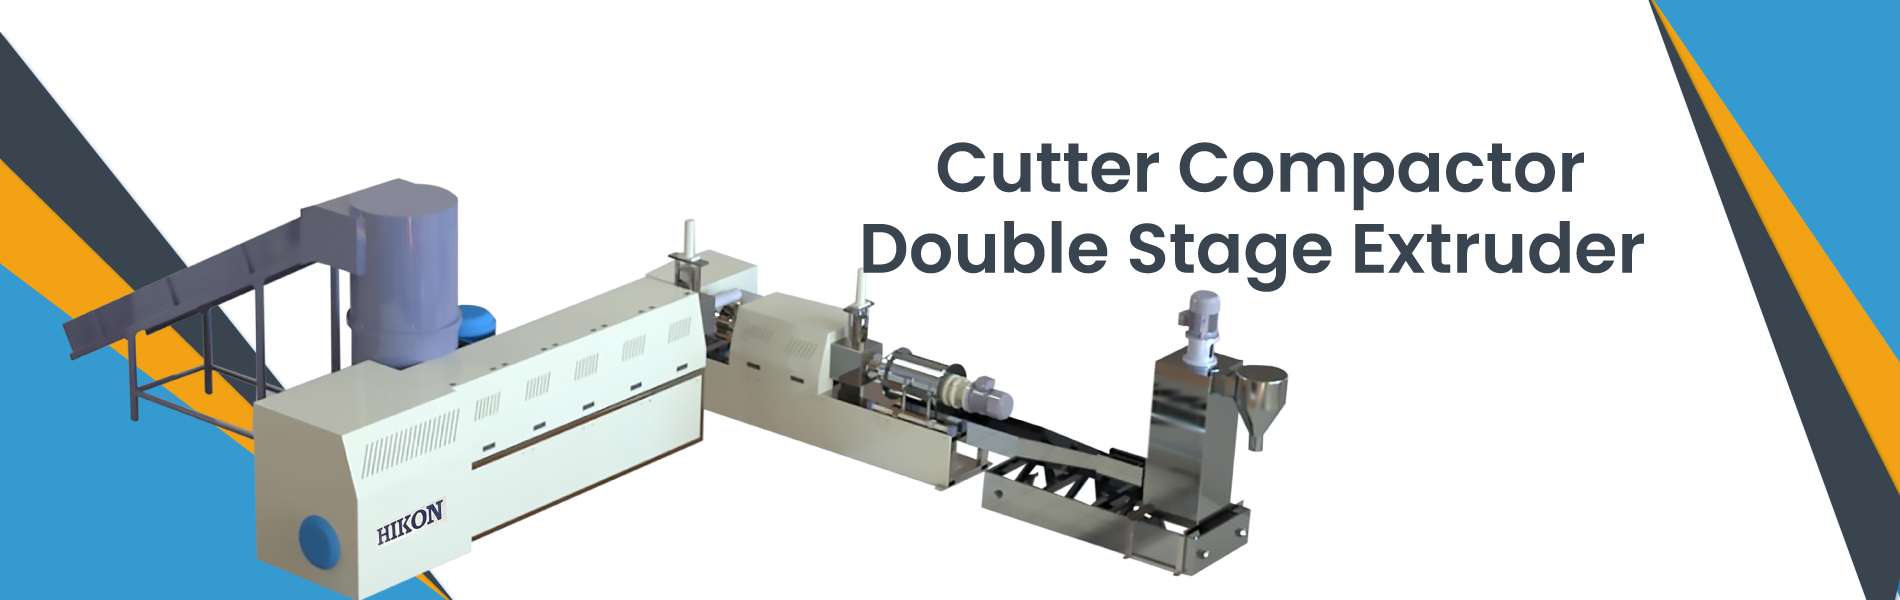 Cutter Compactor Double Stage Extruder in Delhi